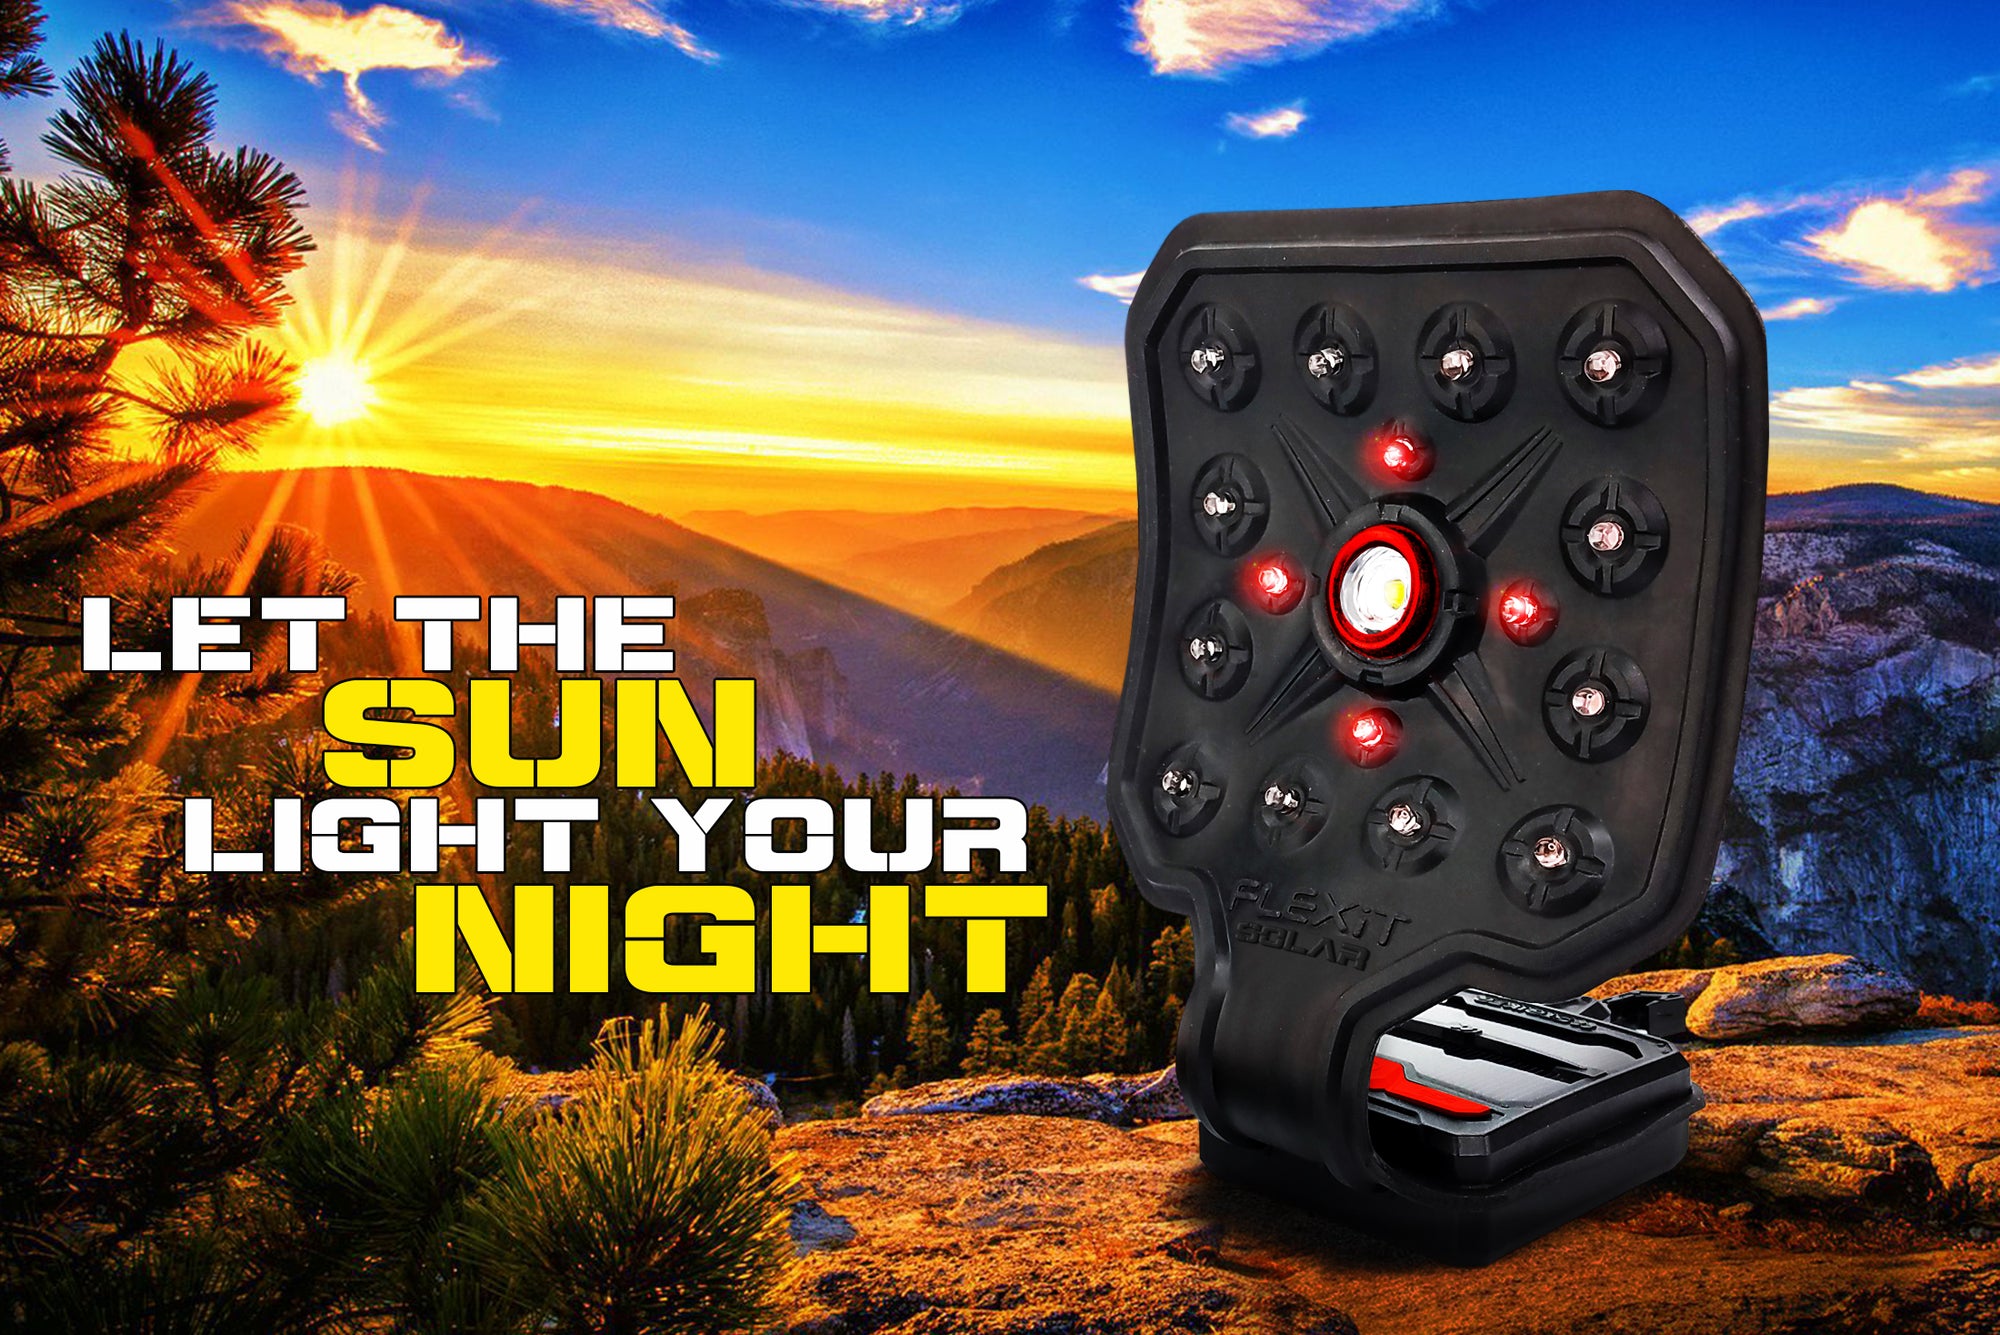 Are Solar Lights Good For Camping?